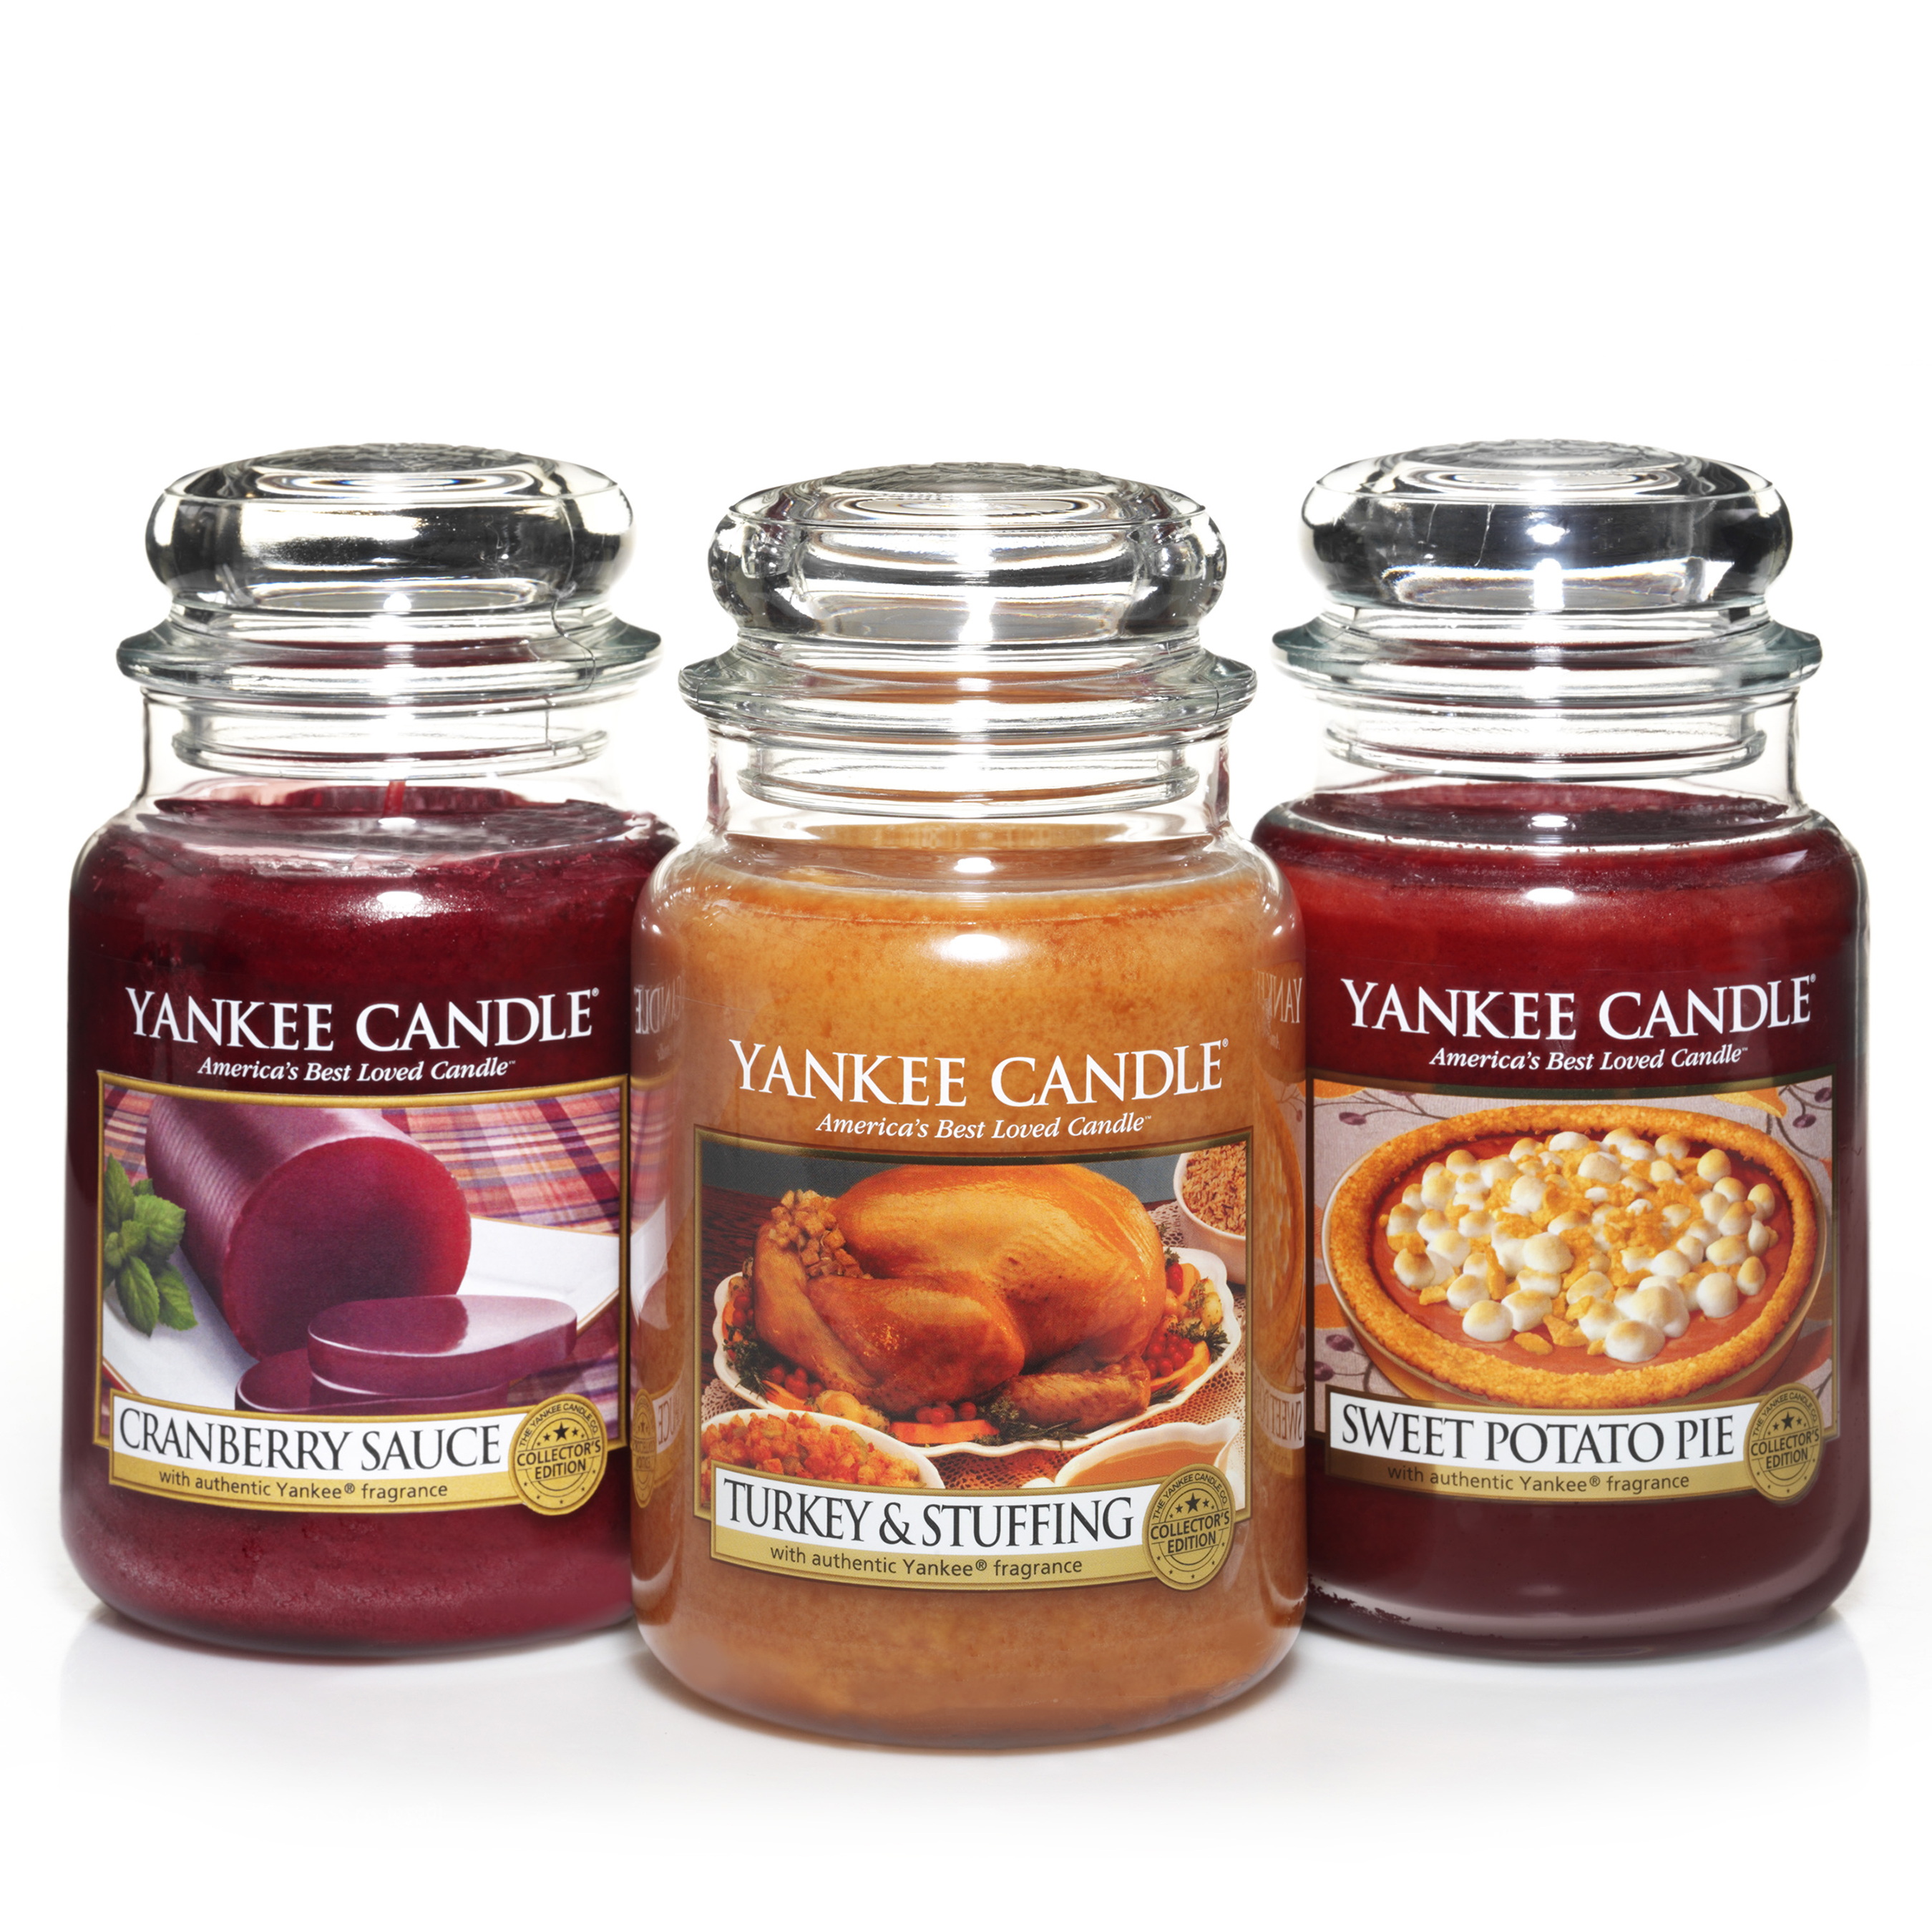 Yankee Candle Launches Thanksgiving Dinner Collection To Support The